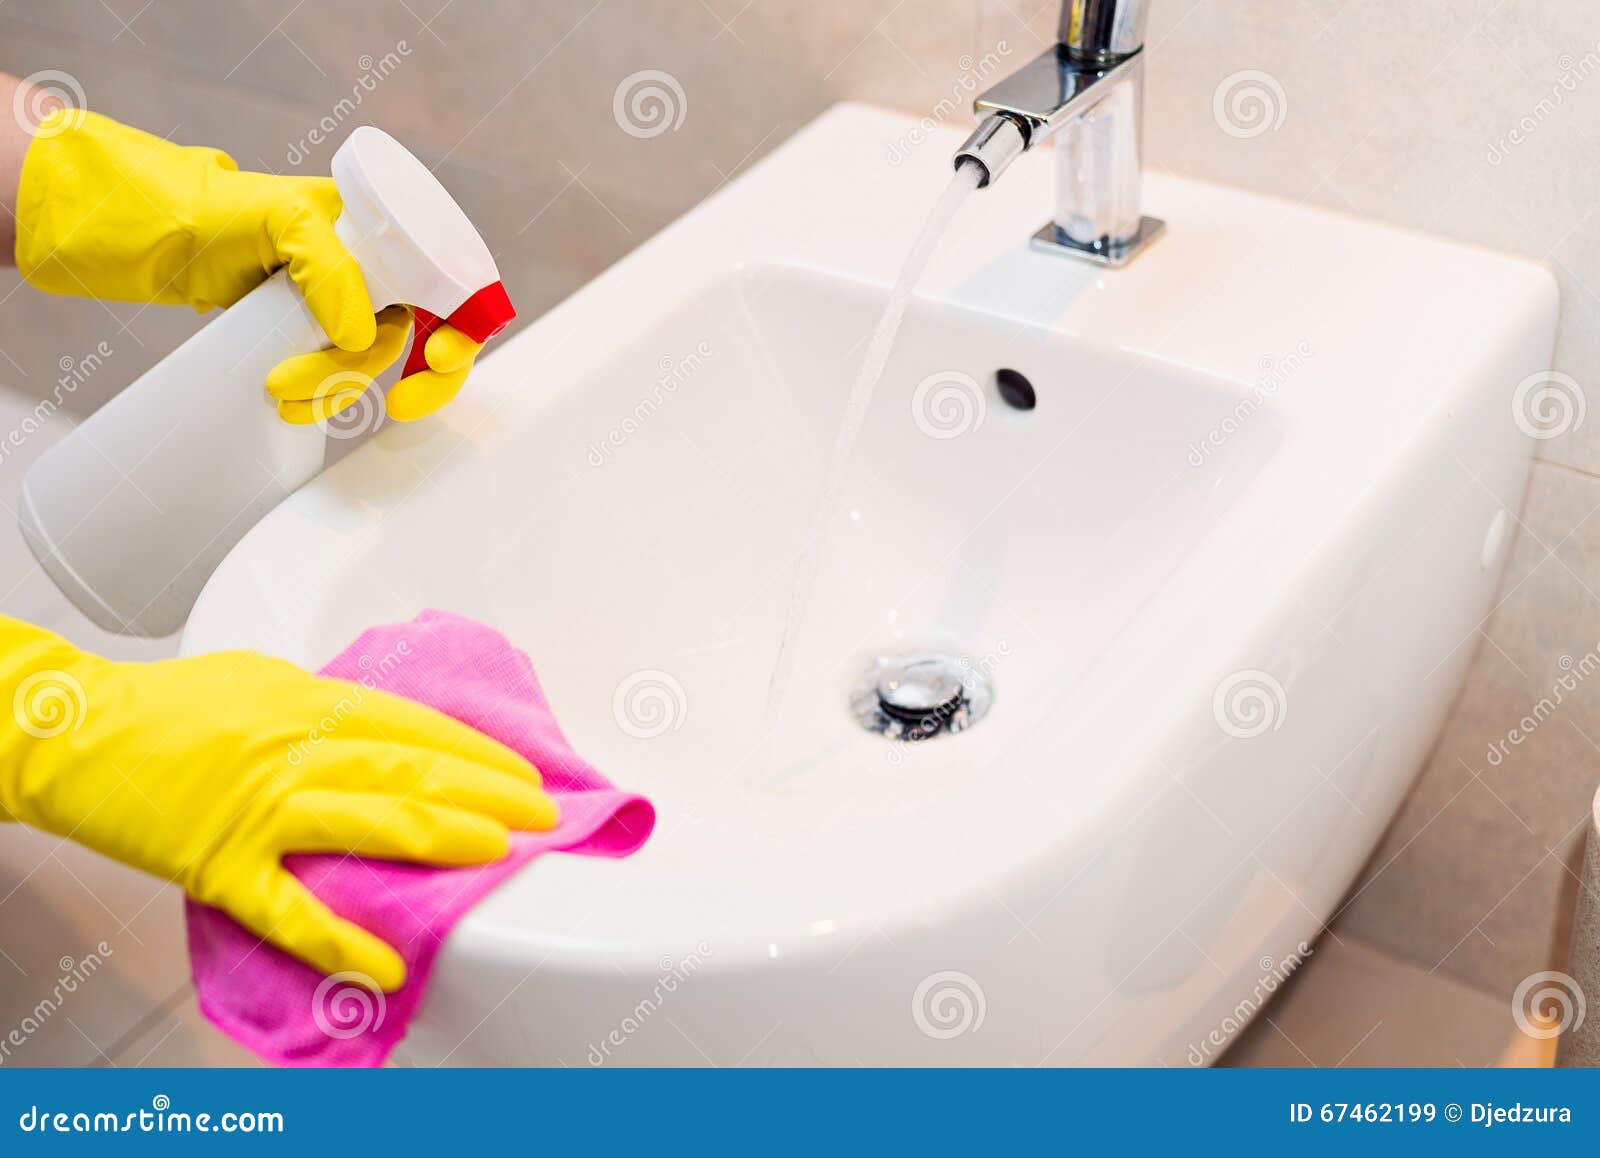 Cleaning Bidet in Wc with Pink Cloth. Stock Image - Image of housework,  bath: 67462199